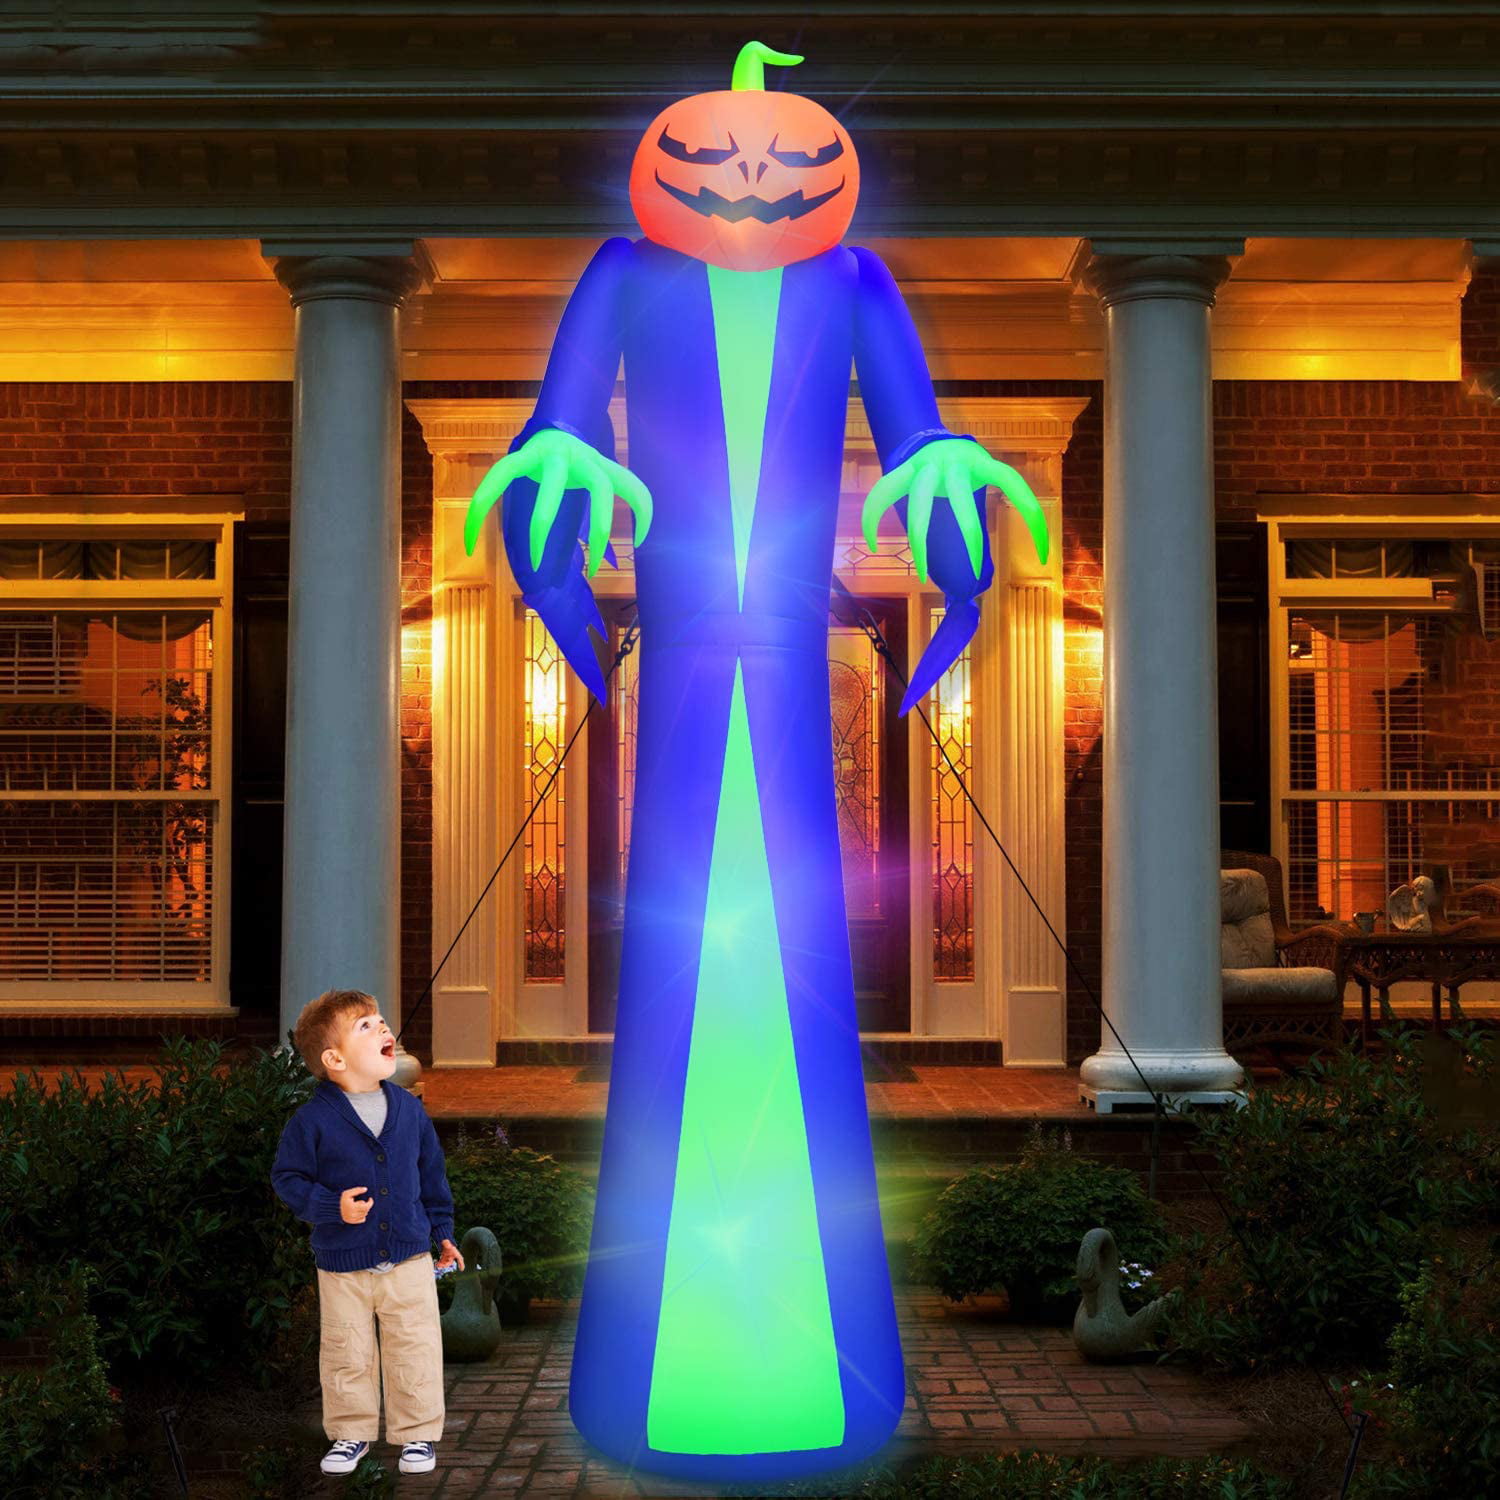 Top 15 blow up halloween decorations to create a spooky atmosphere